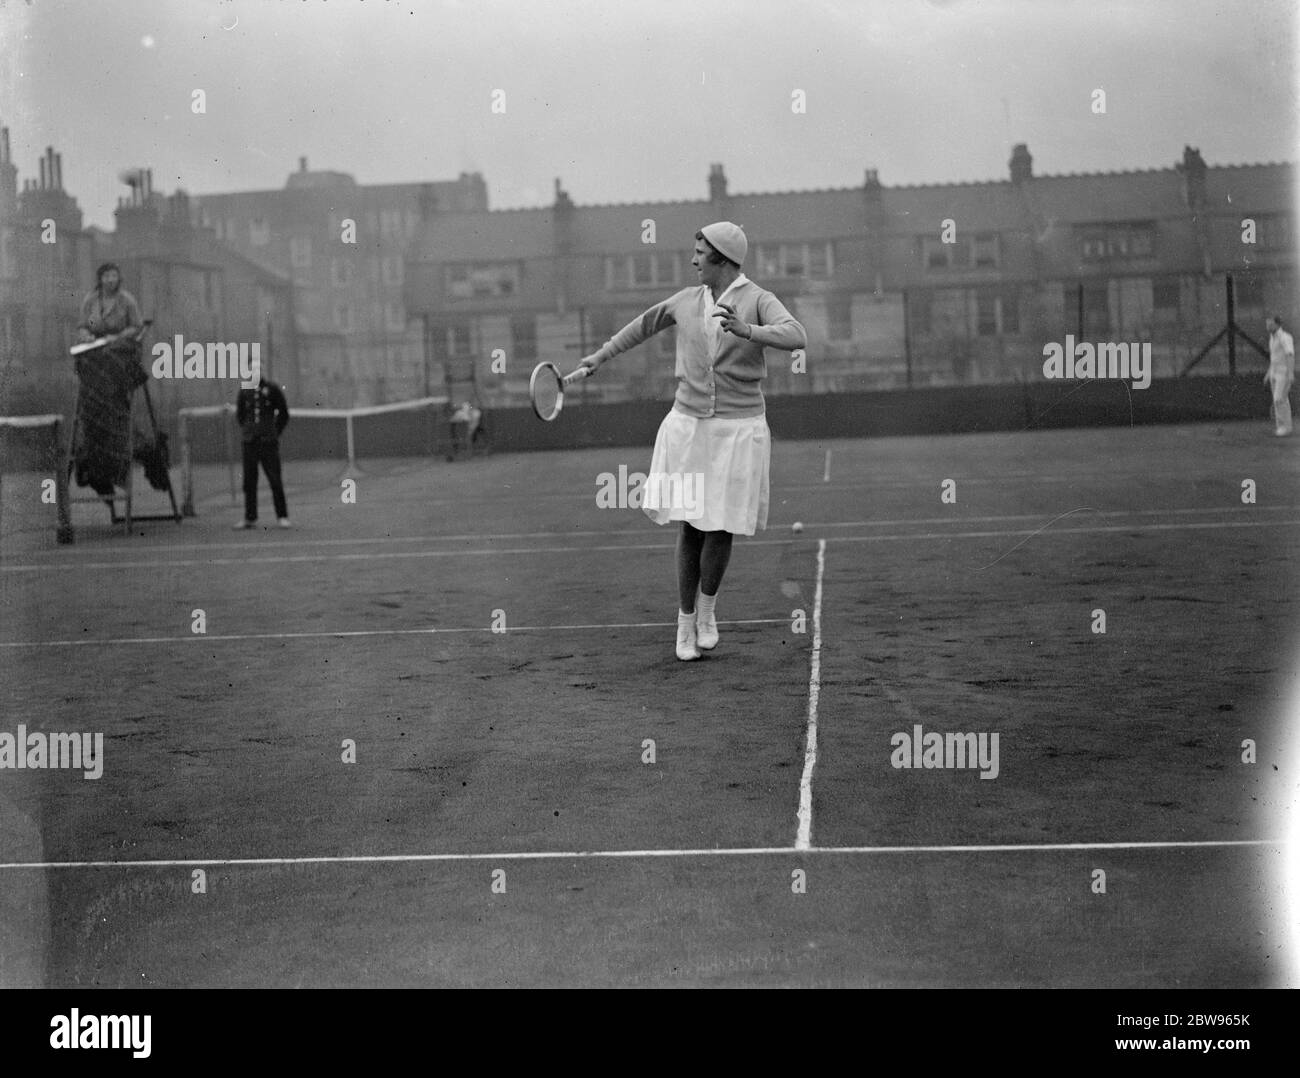 Hampstead hard courts tennis tournament opens . The Hampstead hard courts tennis tournament opend in brilliant weather . Miss Caldwell playing a backhand shot during the tournament . 21 March 1932 Stock Photo